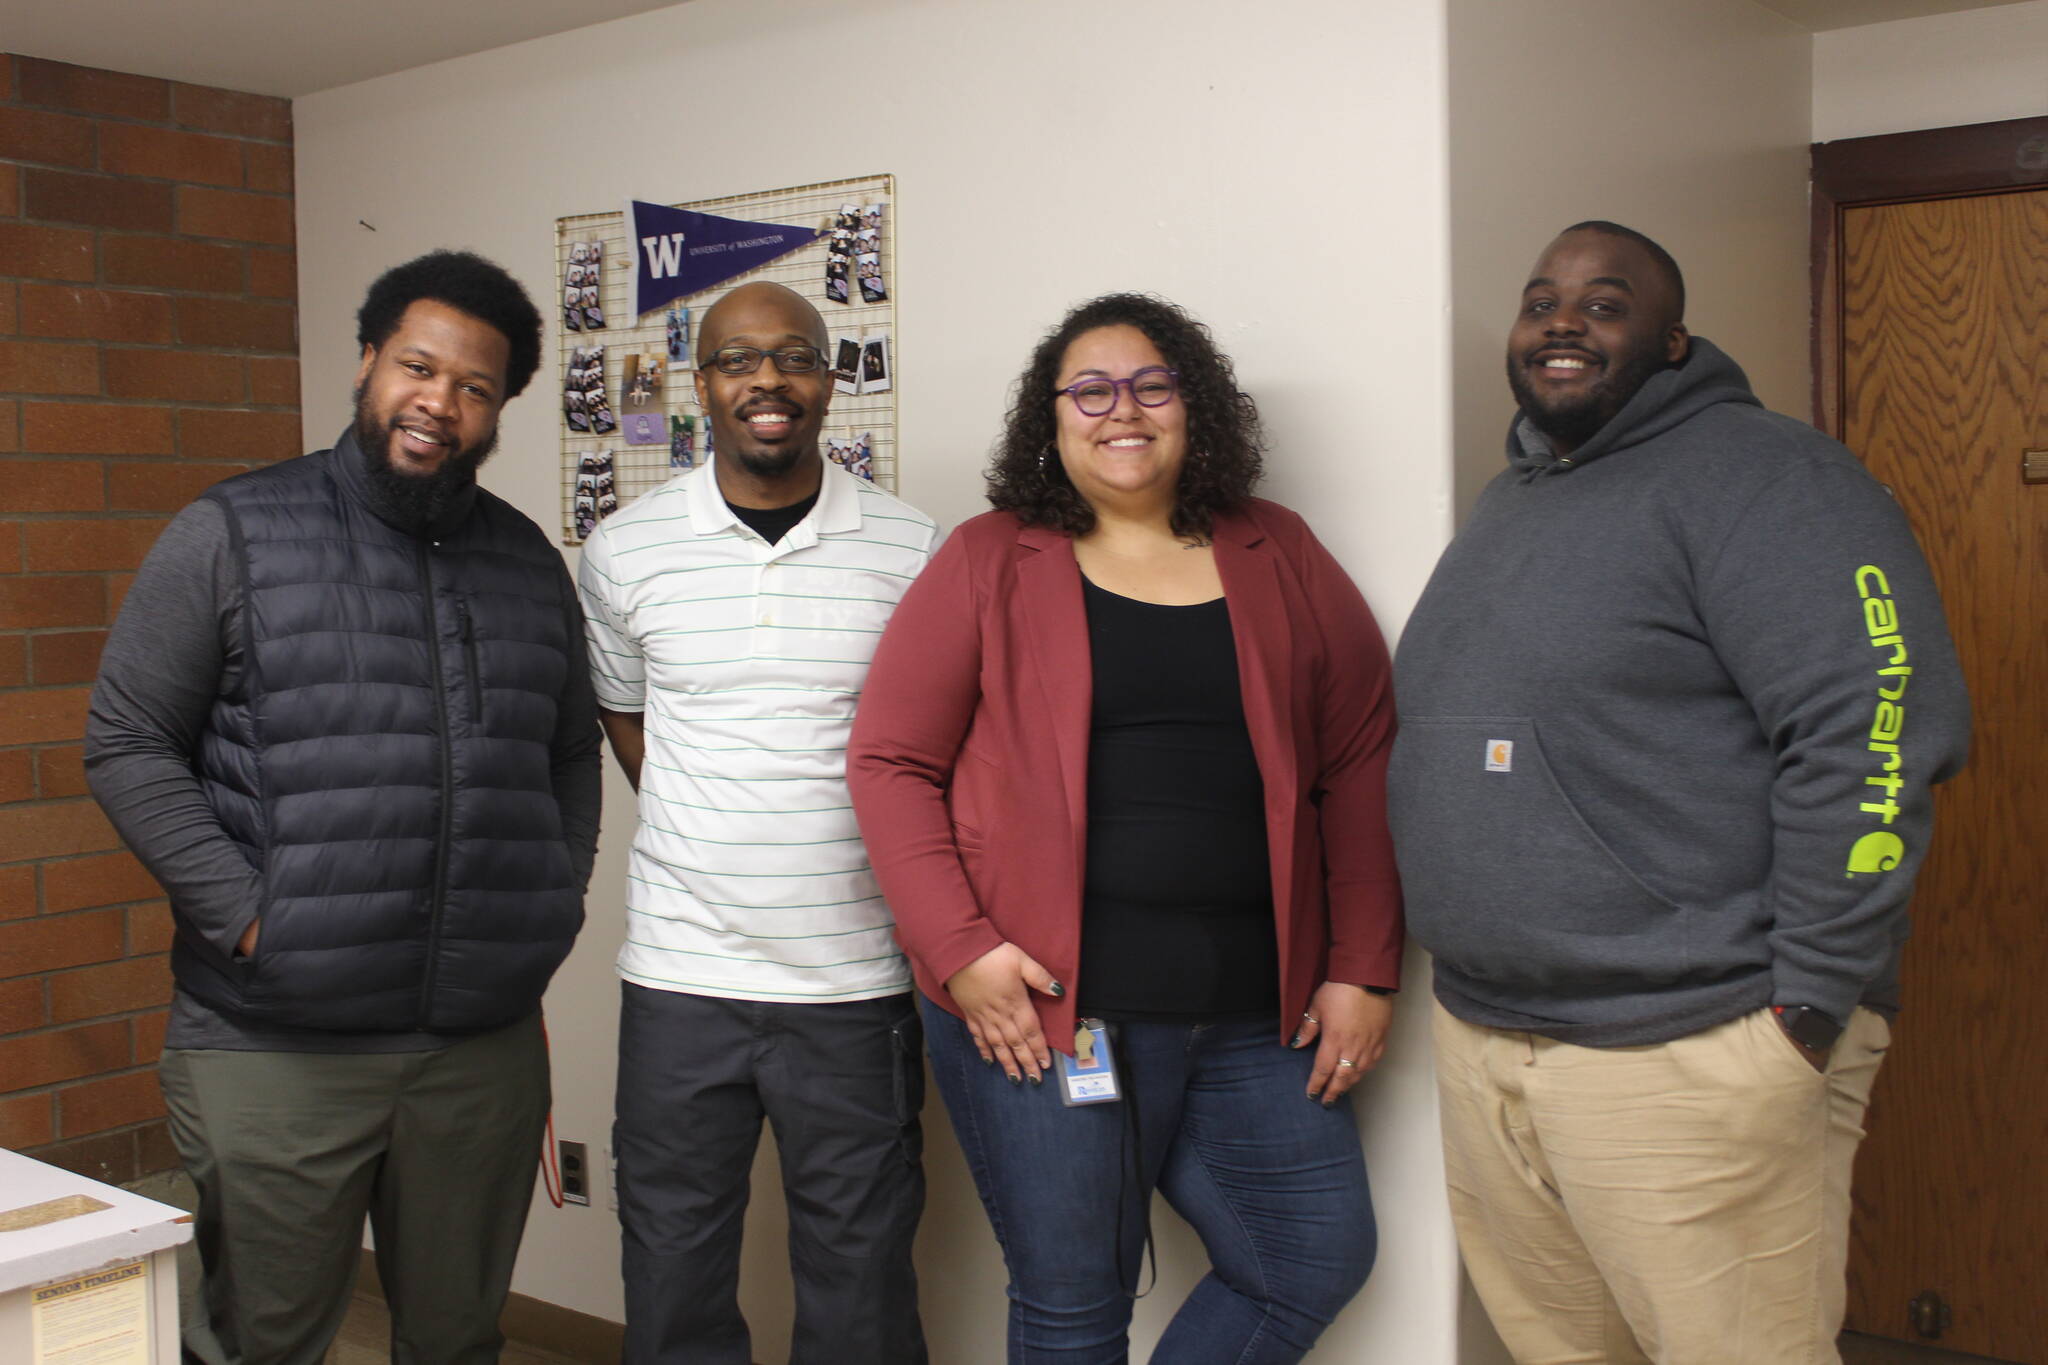 Bailey Jo Josie/ Renton Reporter
Shaquille Blair-Kimber, Curtis Riggins, Kirsten Thornton and Clarence Baber helped make the HBCU trip a possibility and will accompany students during Spring Break.